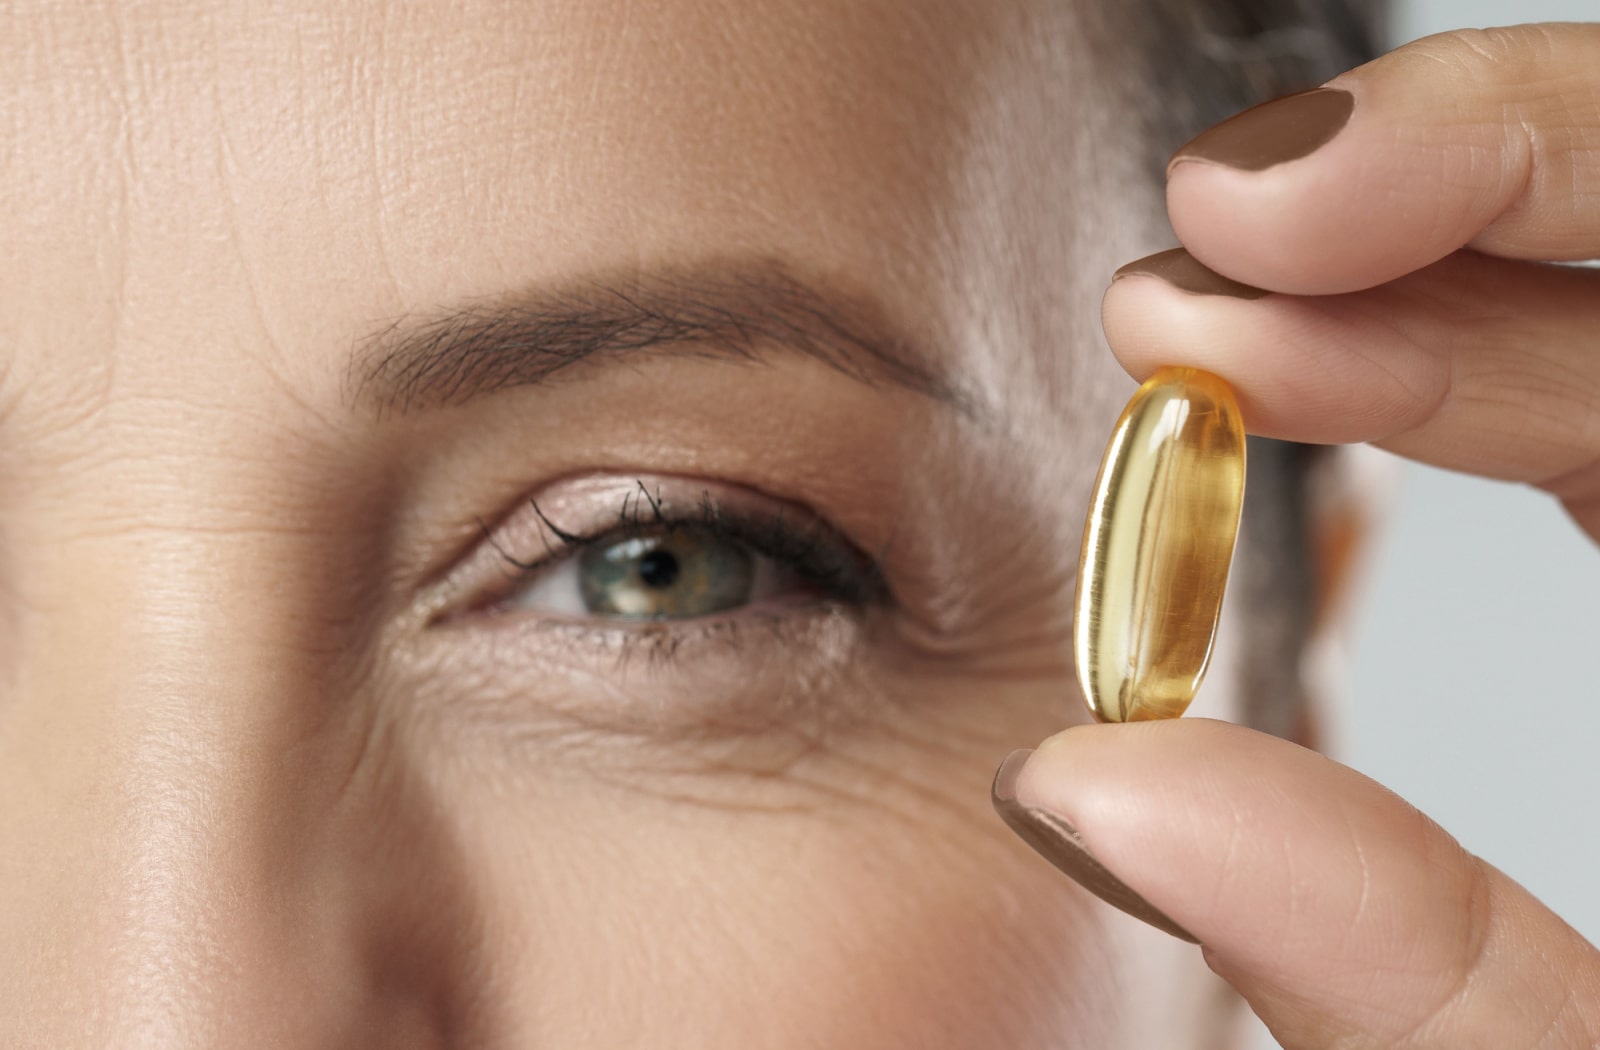 A woman holds up an Omega 3 vitamin next to her eye